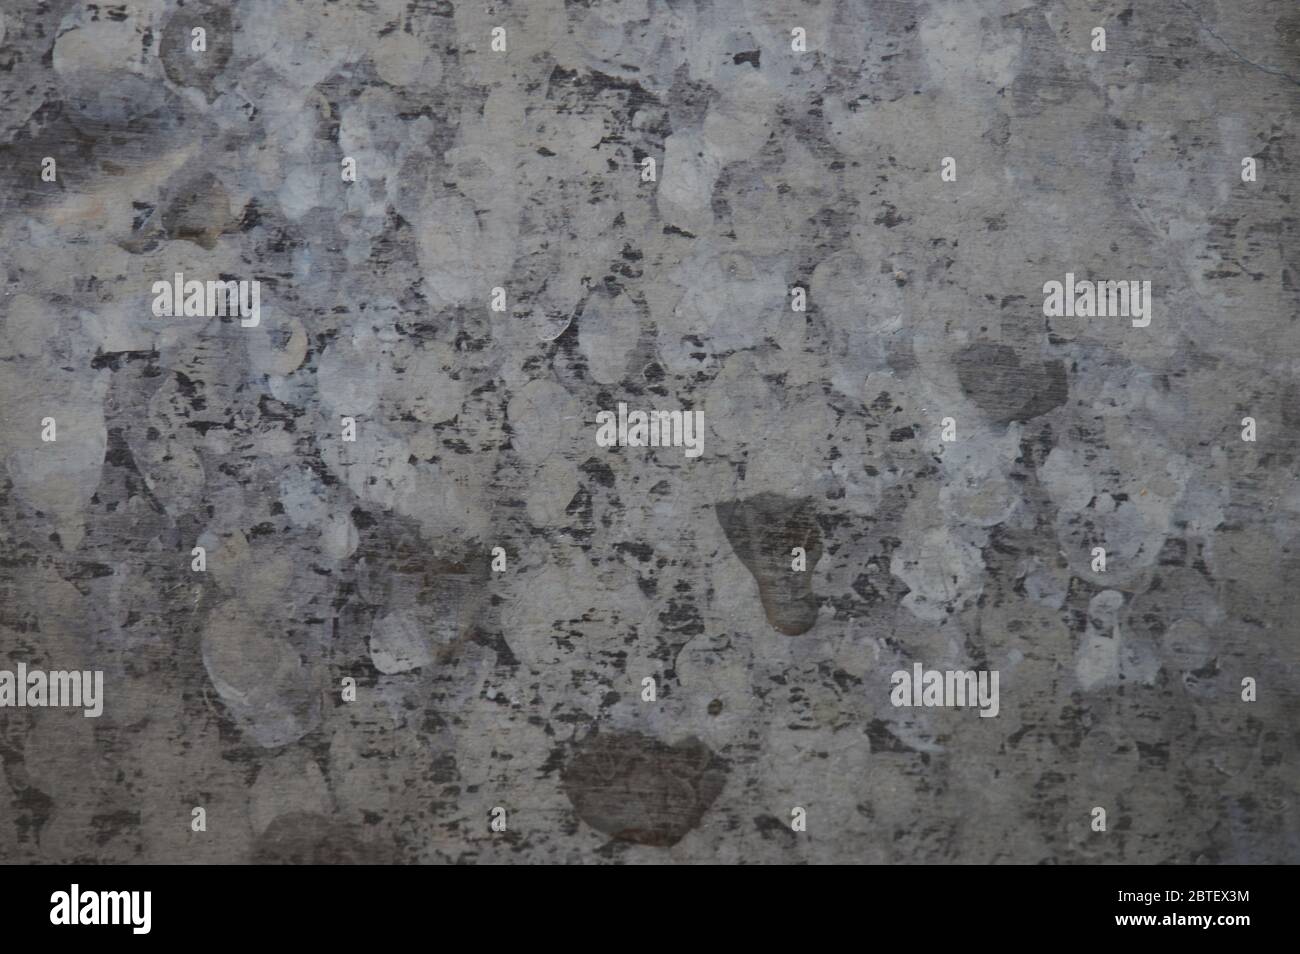 Water residue on metal surface macro close up view Stock Photo